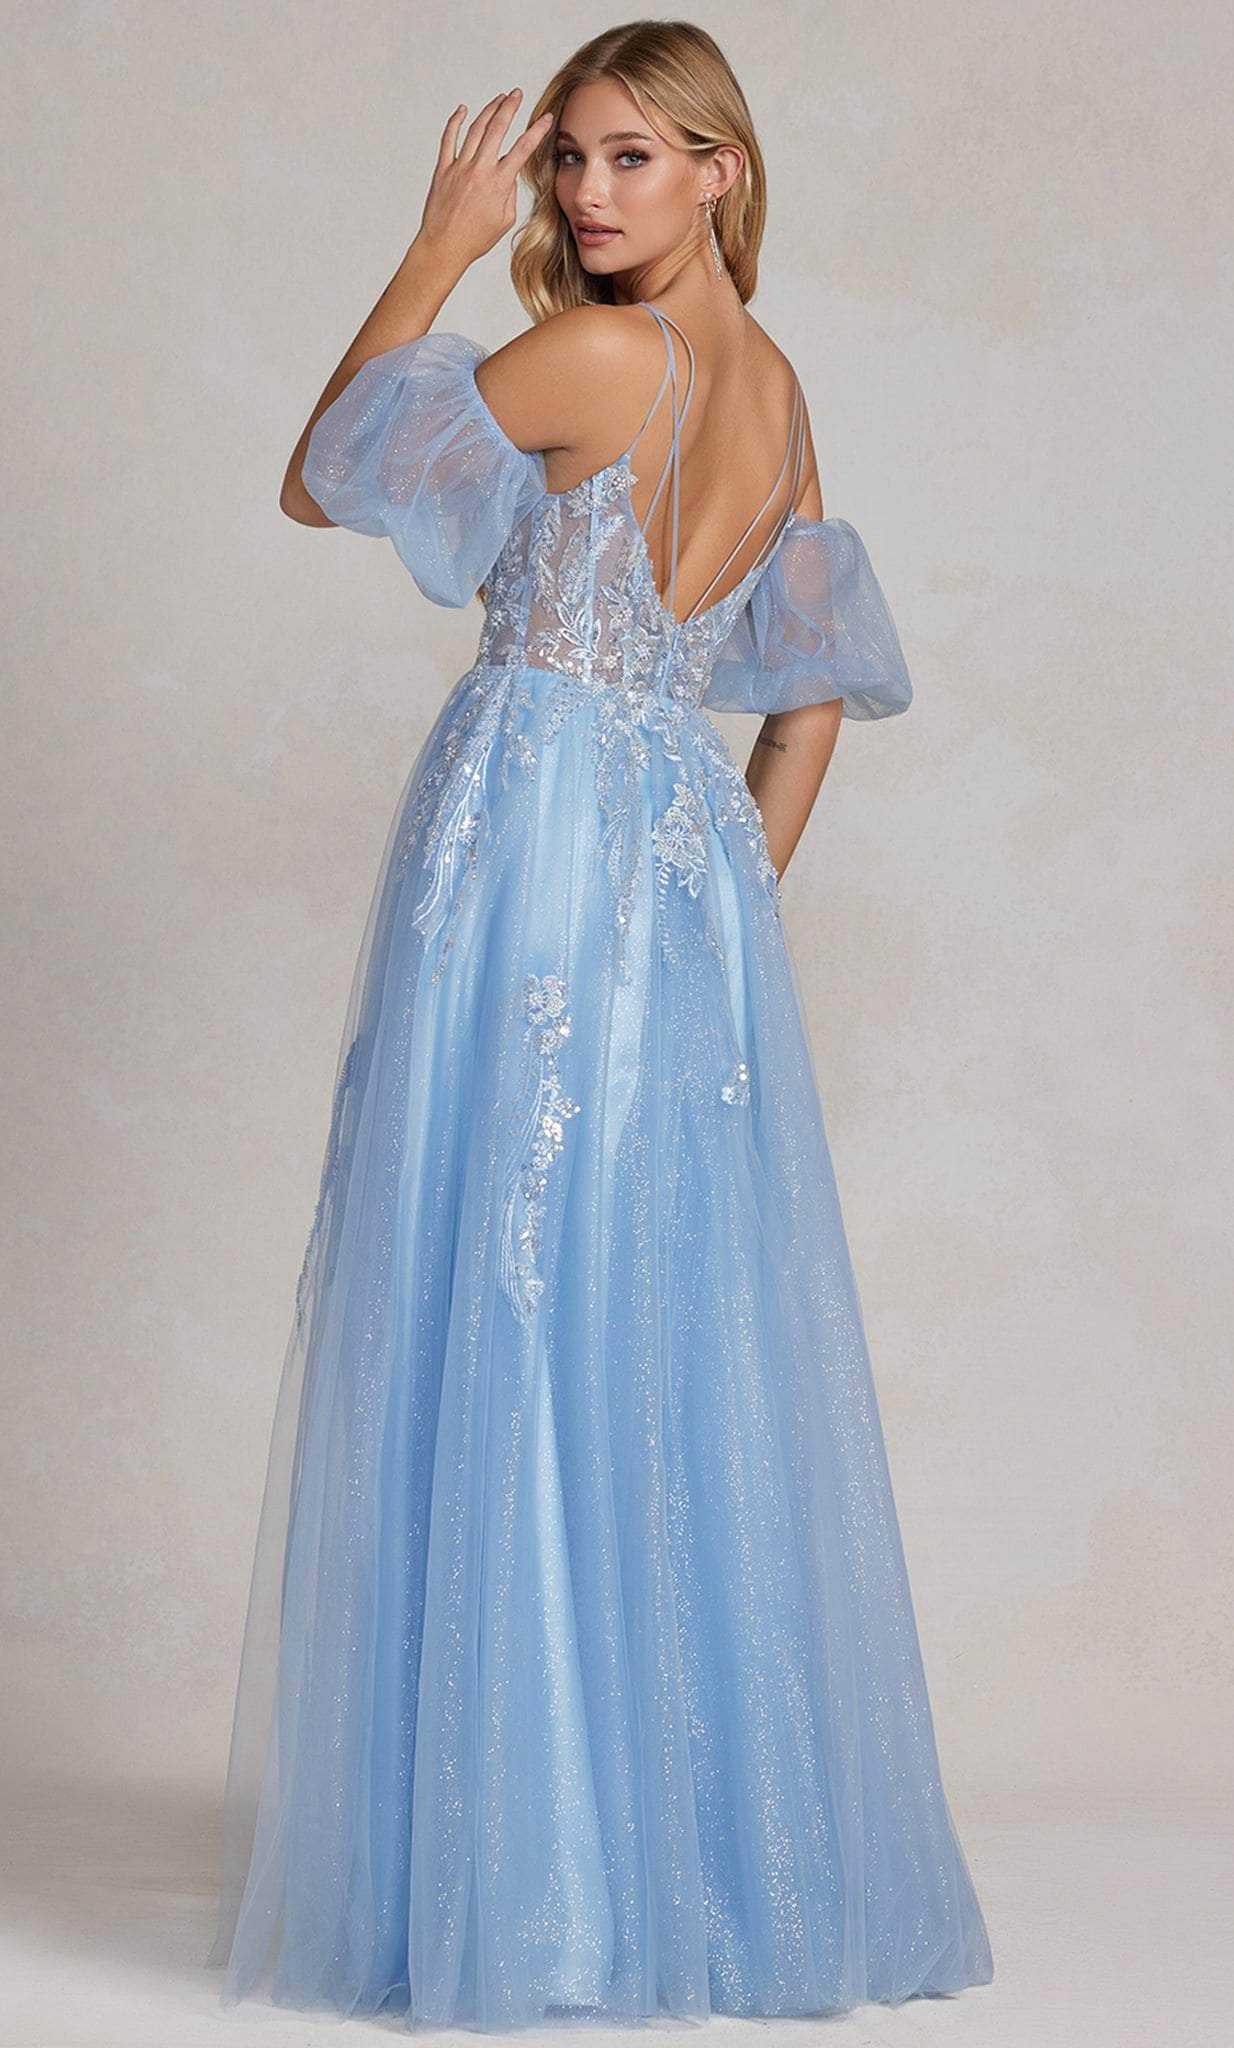 Nox Anabel, Nox Anabel E1173 - Cold Shoulder Tulle Prom Gown